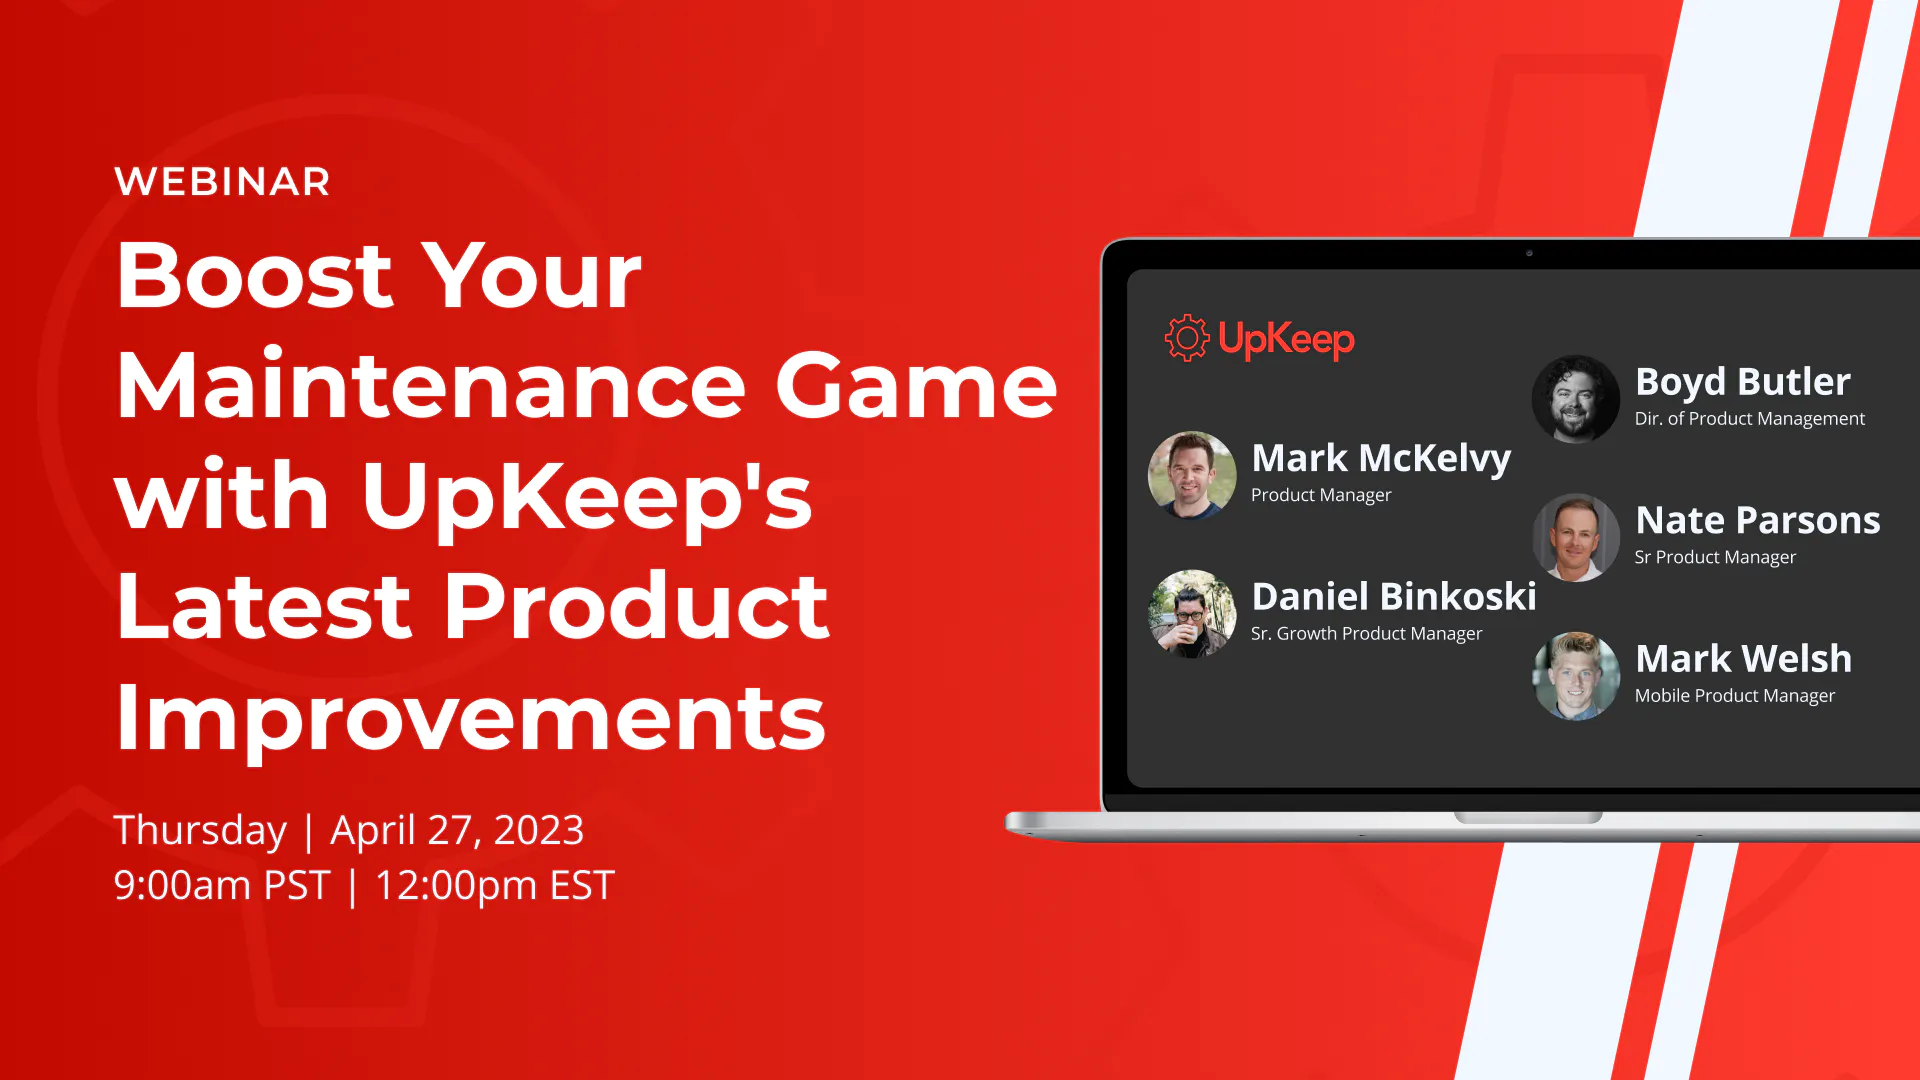 Boost Your Maintenance Game with UpKeep's Latest Product Improvements: Join Our Webinar!